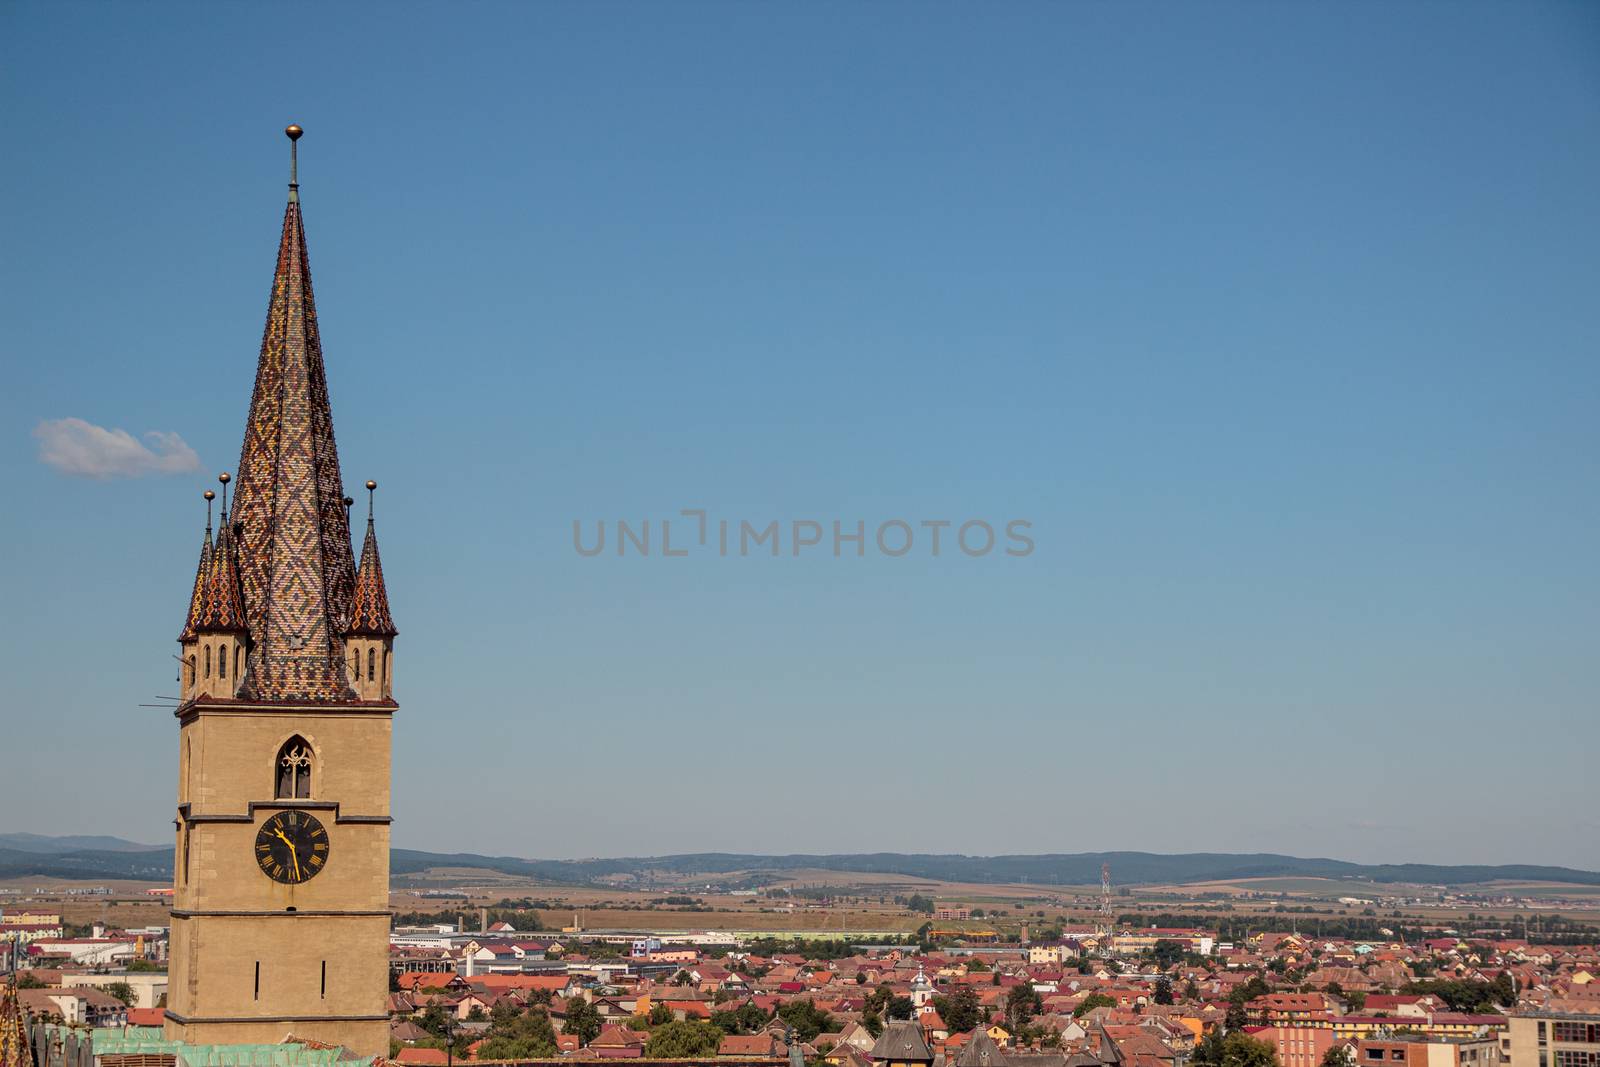 SIBIU, ROMANIA - Circa 2020: High view of old medieval town with cloudy blue sky. Beautiful tourist spot in eastern central Europe. Aerial view of famous Evangelic Church in Sibiu Romania by dugulan